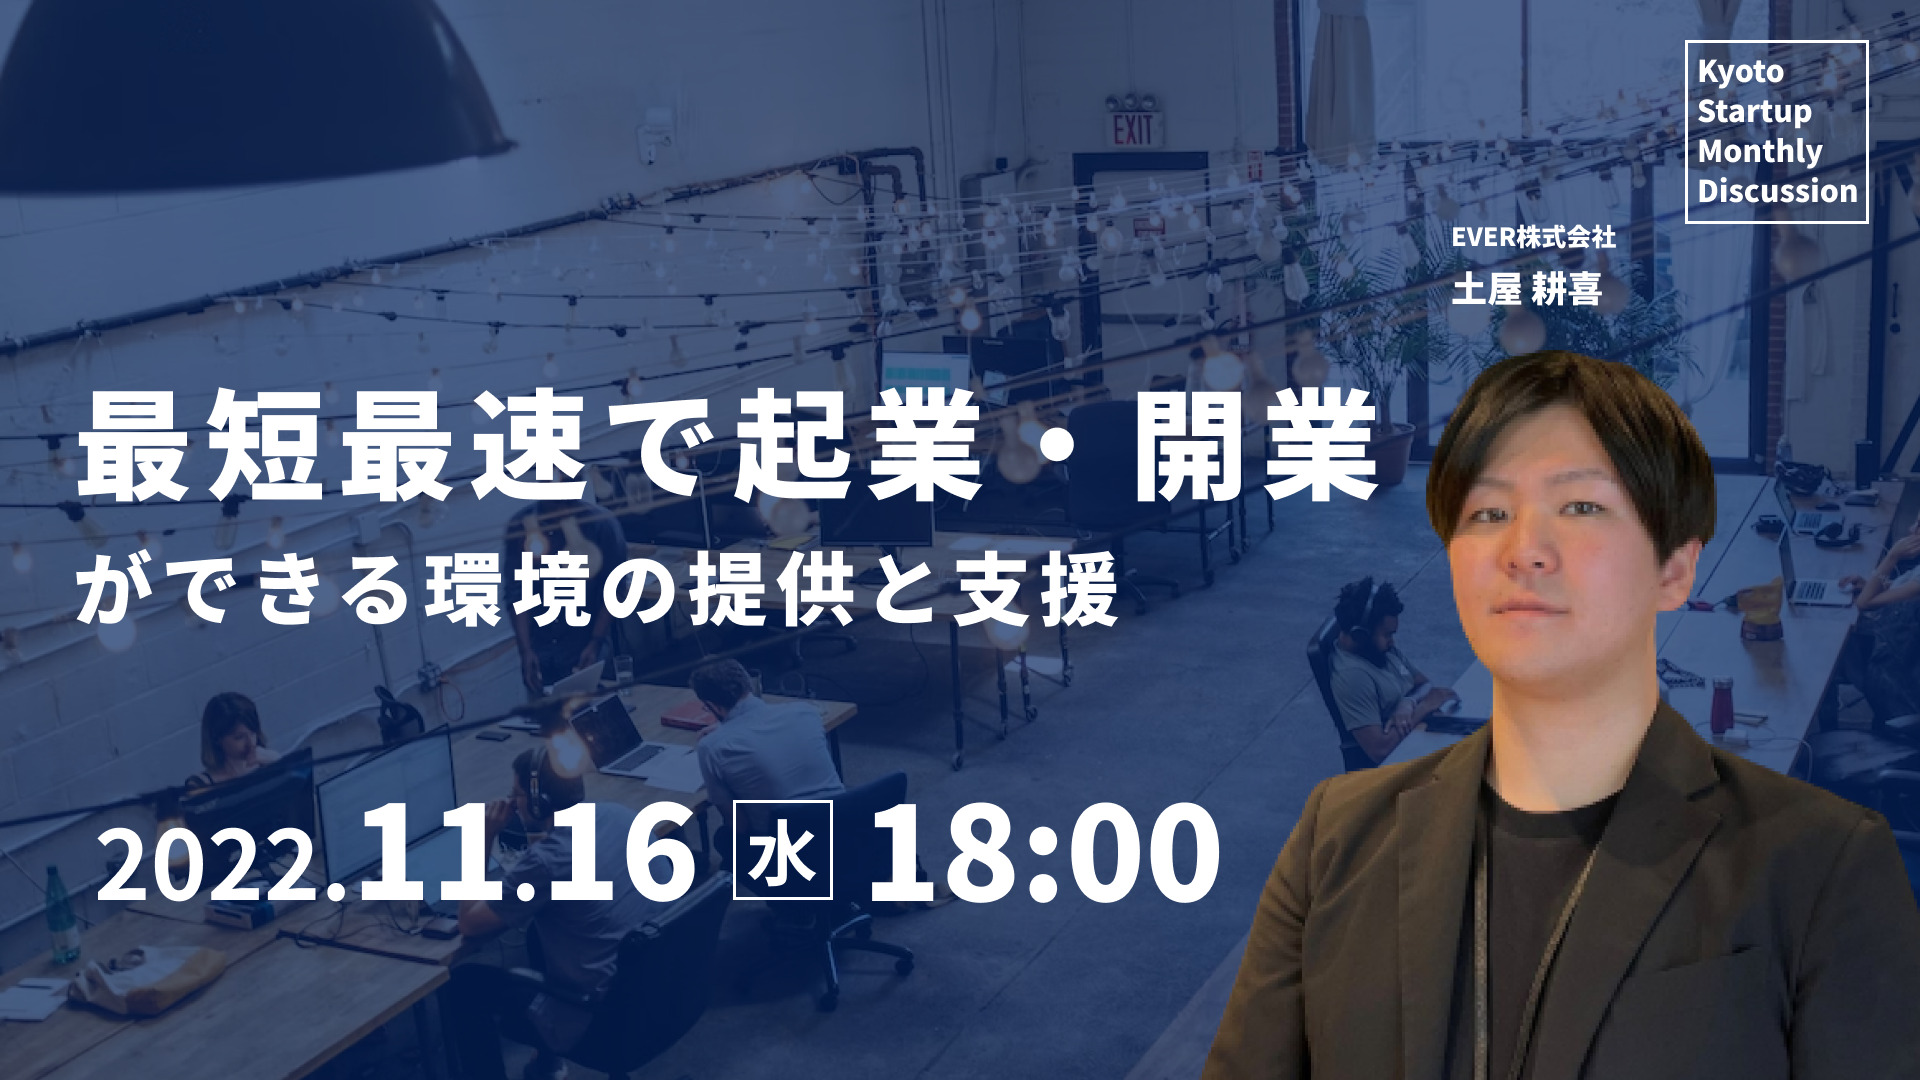 Kyoto Startup Monthly Discussion #18